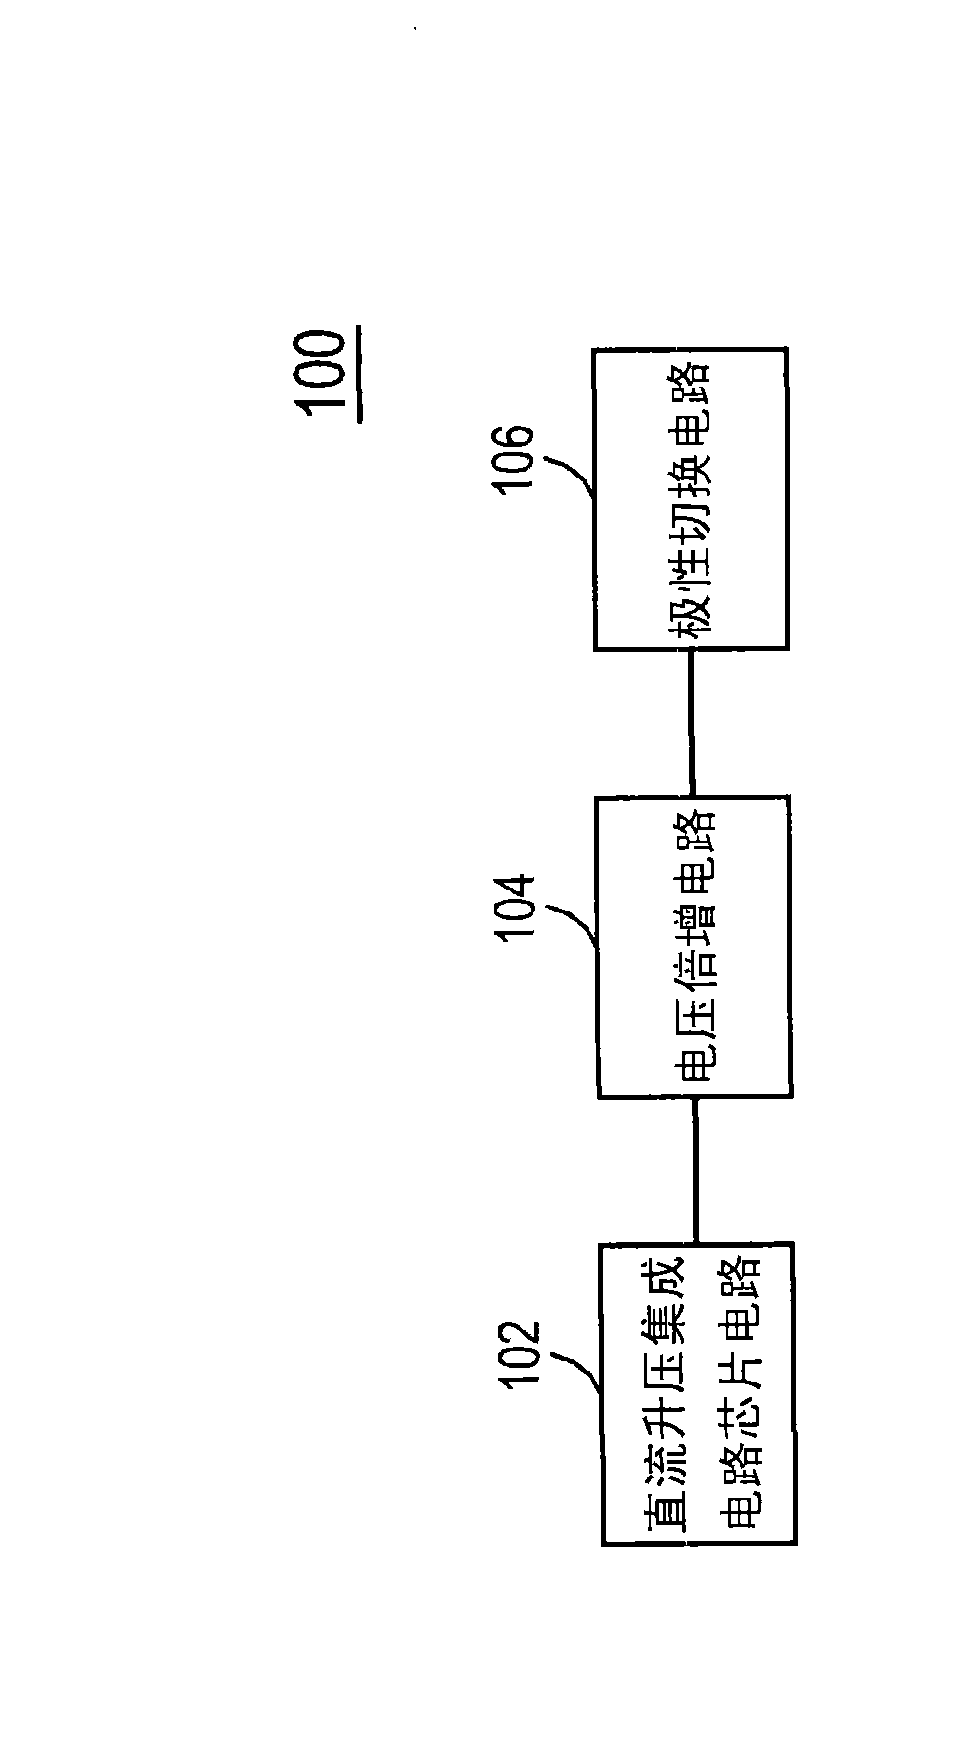 Drive circuit and applicative piezoelectric actuating pump thereof